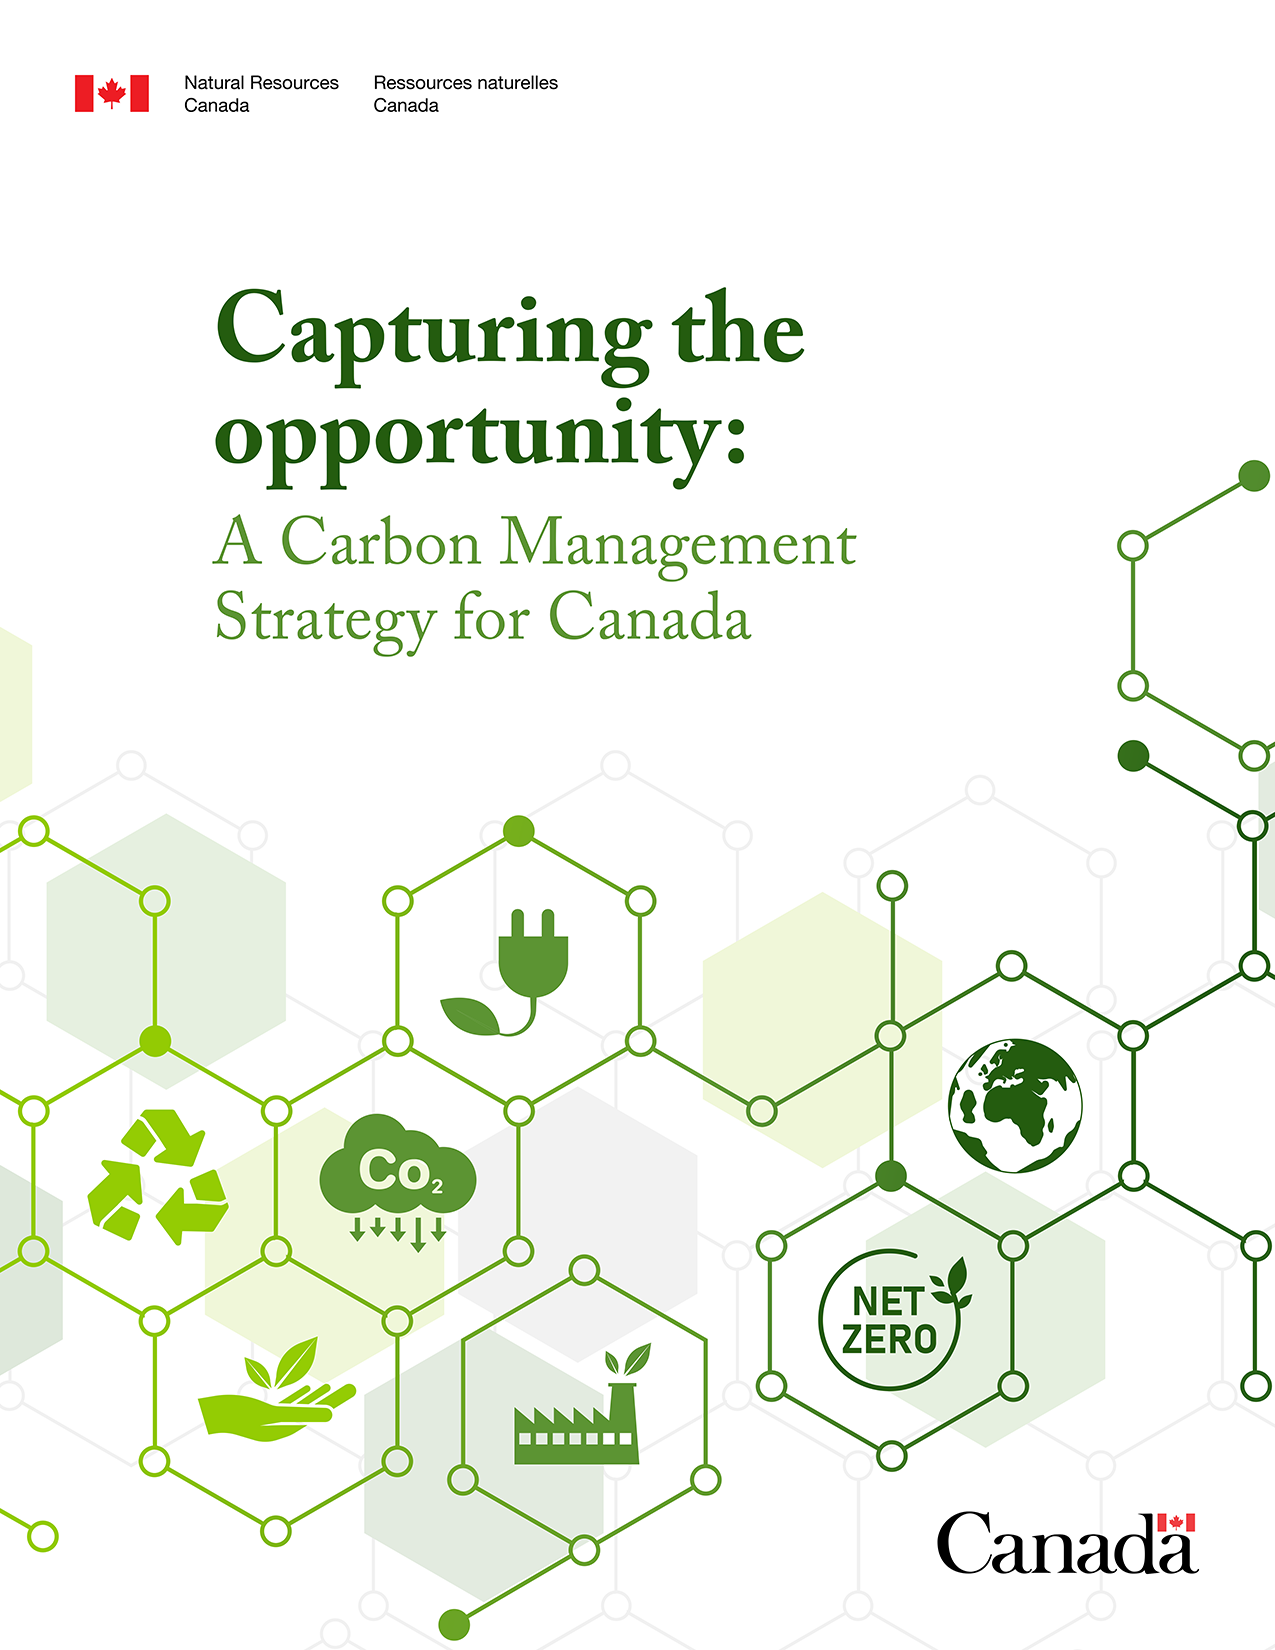 https://natural-resources.canada.ca/sites/nrcan/files/energy/NRCan_CCMS_EN-1.png